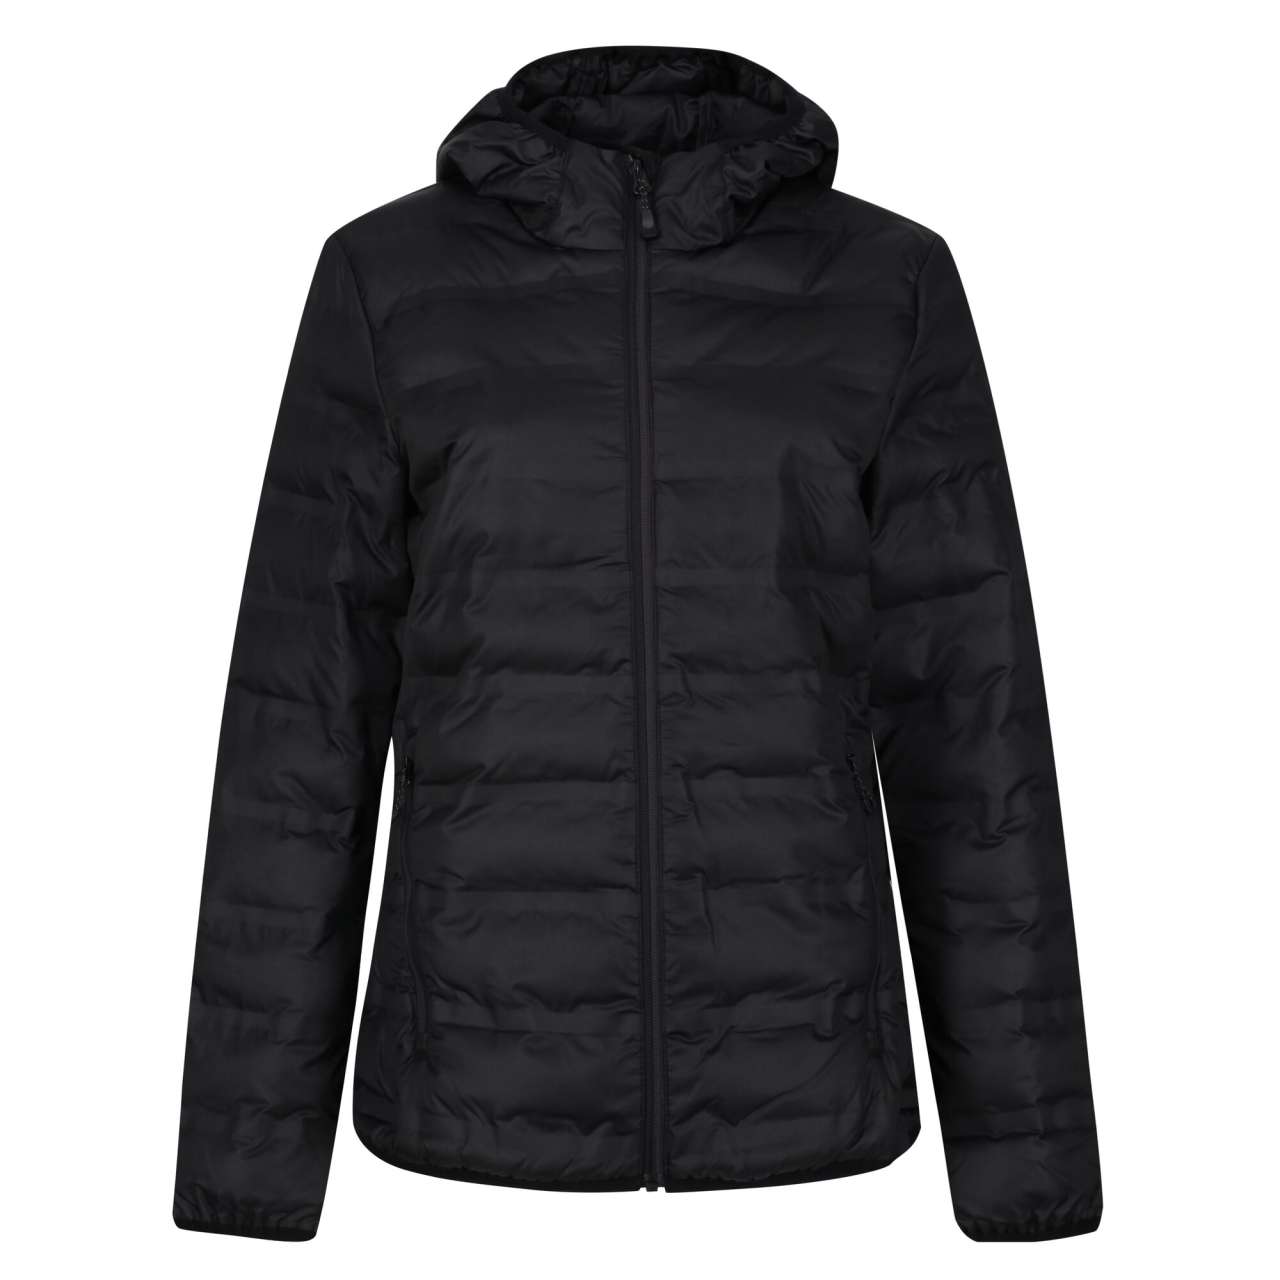 WOMEN'S X-PRO ICEFALL III PERFORMANCE INSULATED SEAMLESS QUILT JACKET